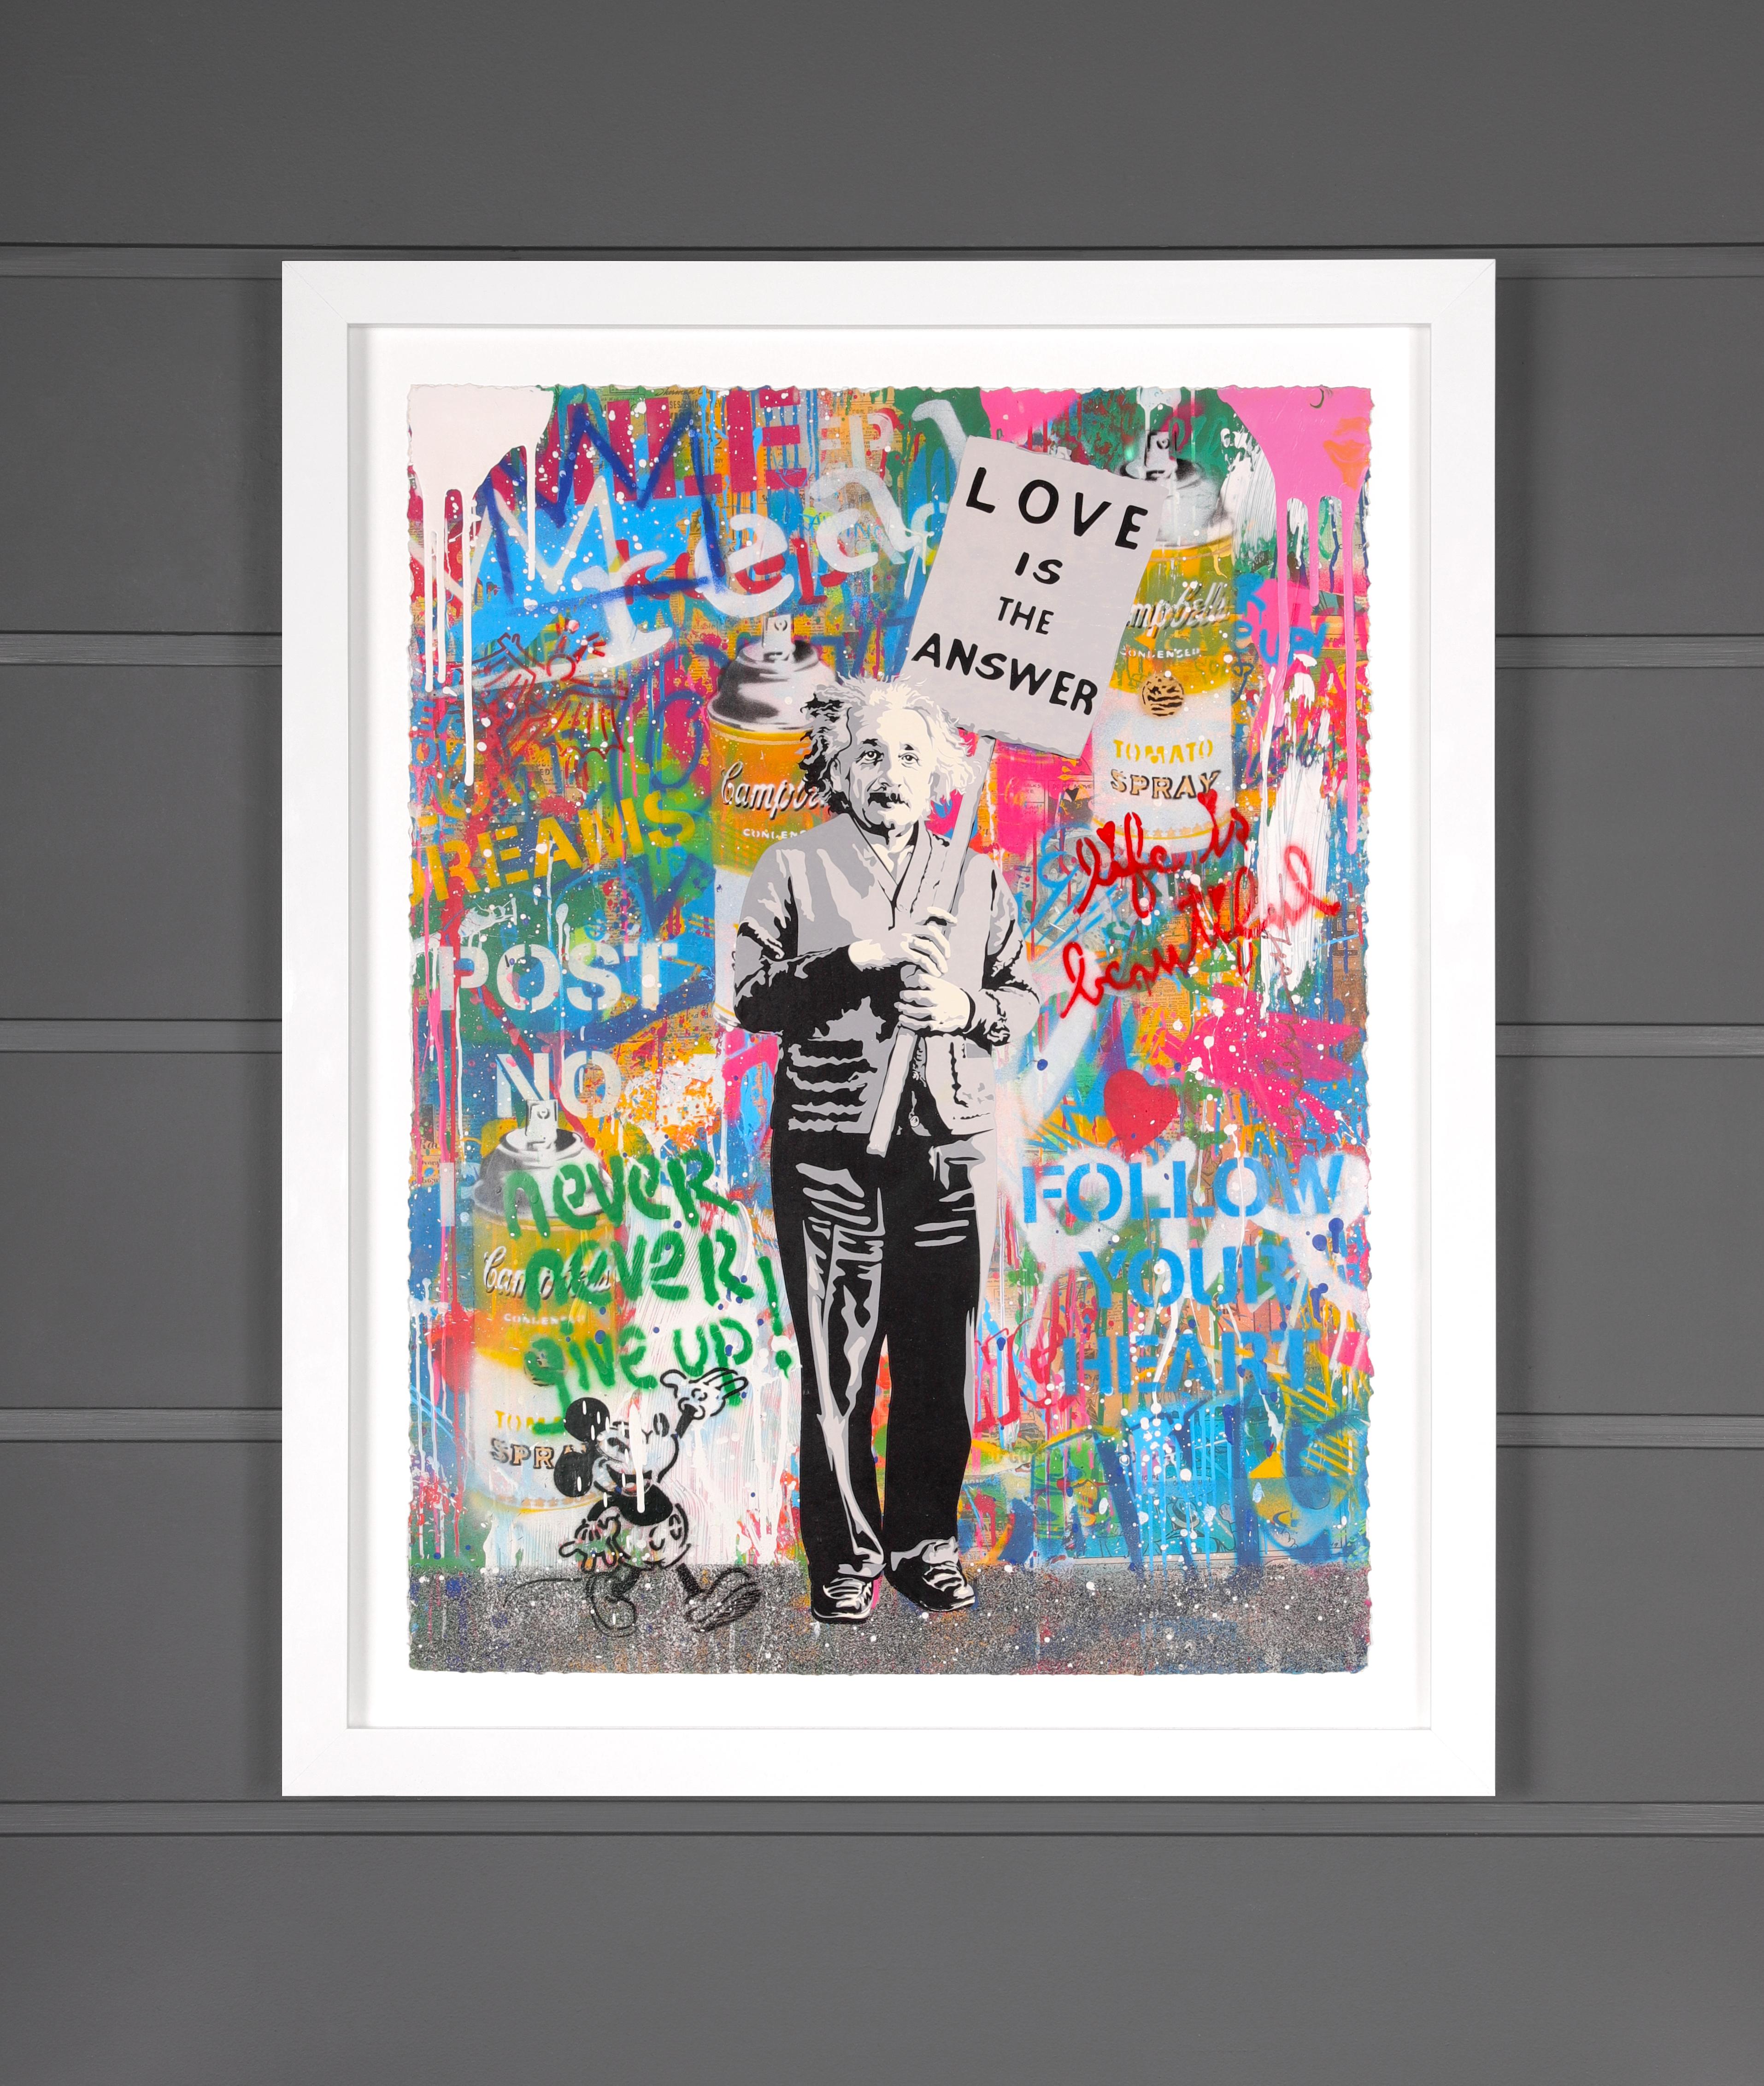 'Never, Never Give Up Einstein' Unique painting - Painting by Mr. Brainwash